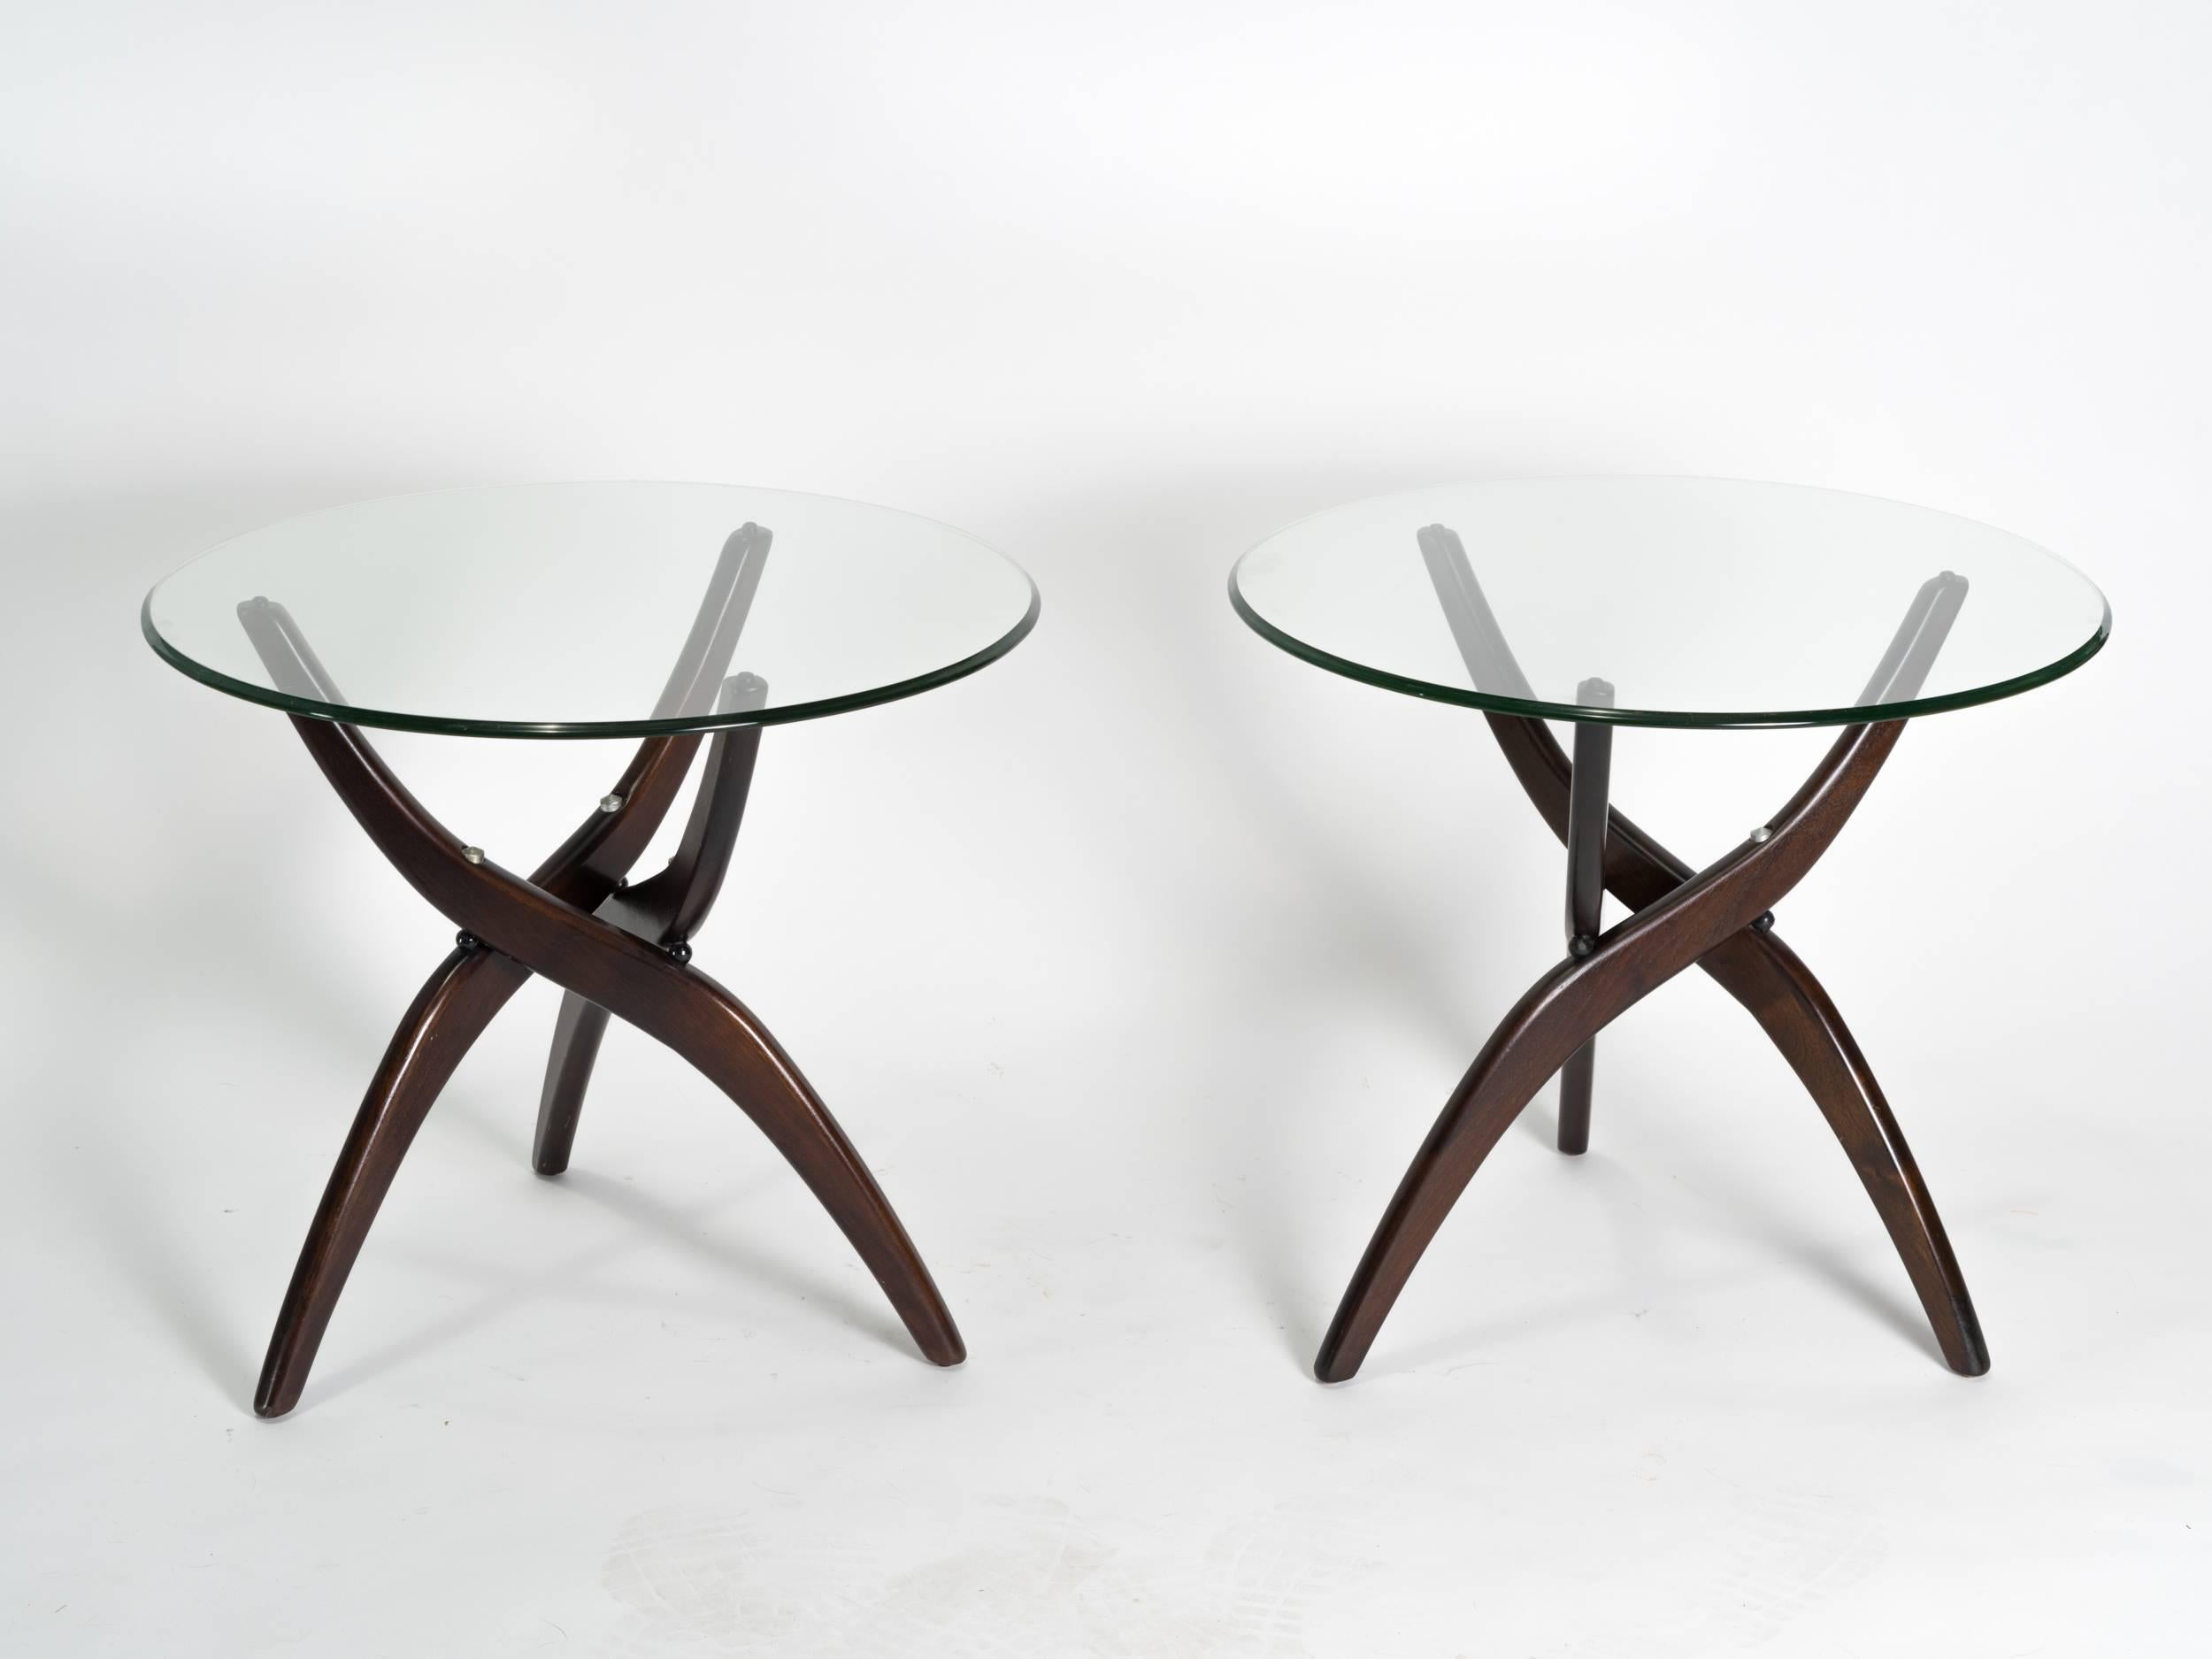 Pair of sculptural side tables by Adrian Pearsall. Walnut with glass tops.